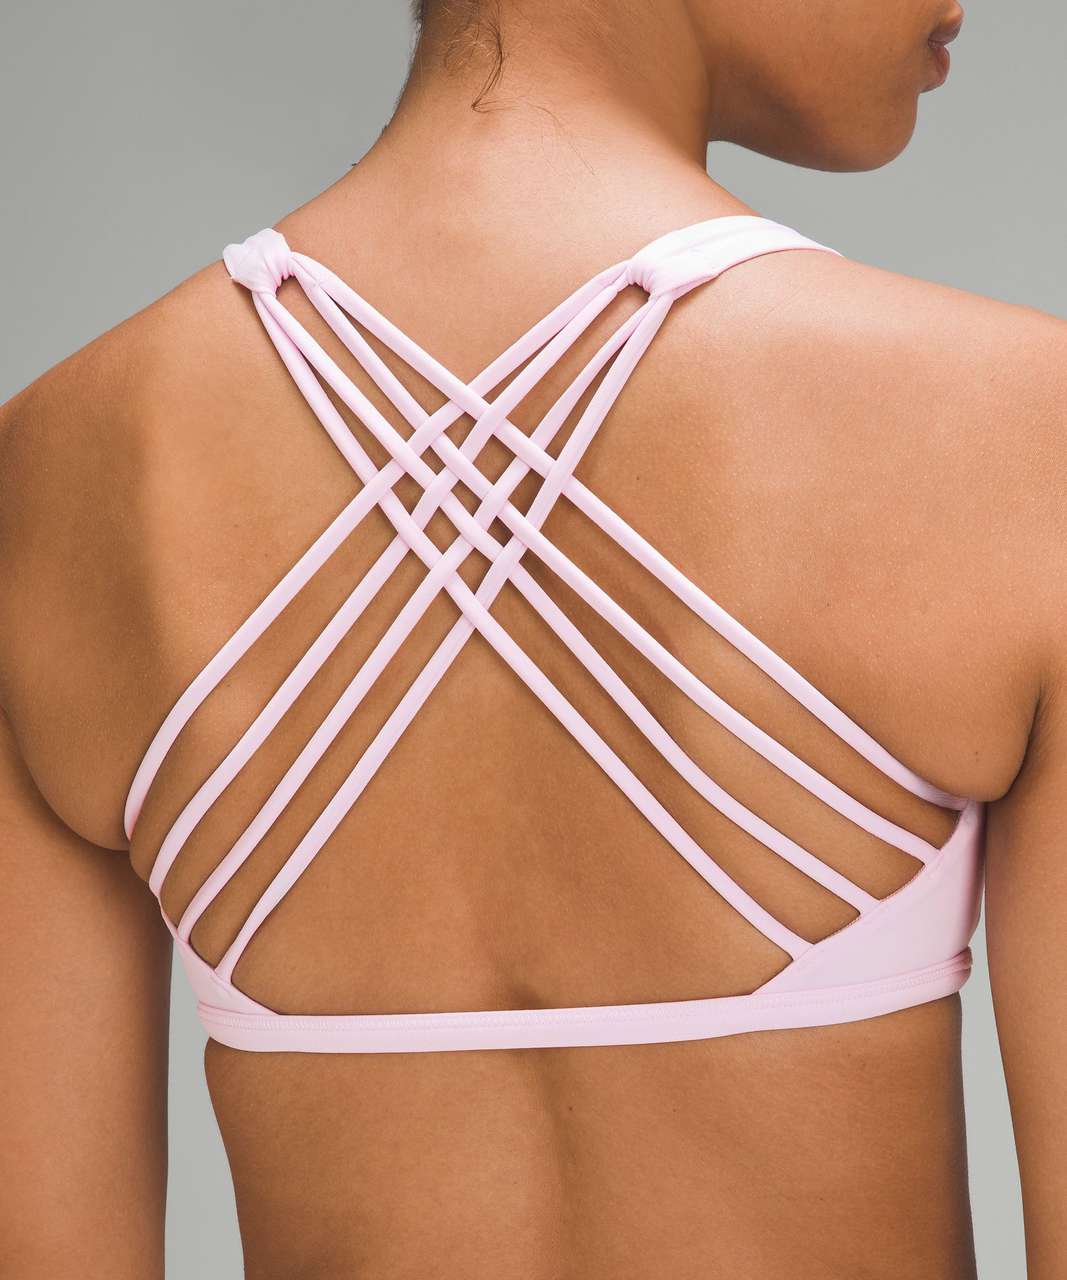 Lululemon Free to Be Bra - Wild *Light Support, A/B Cup